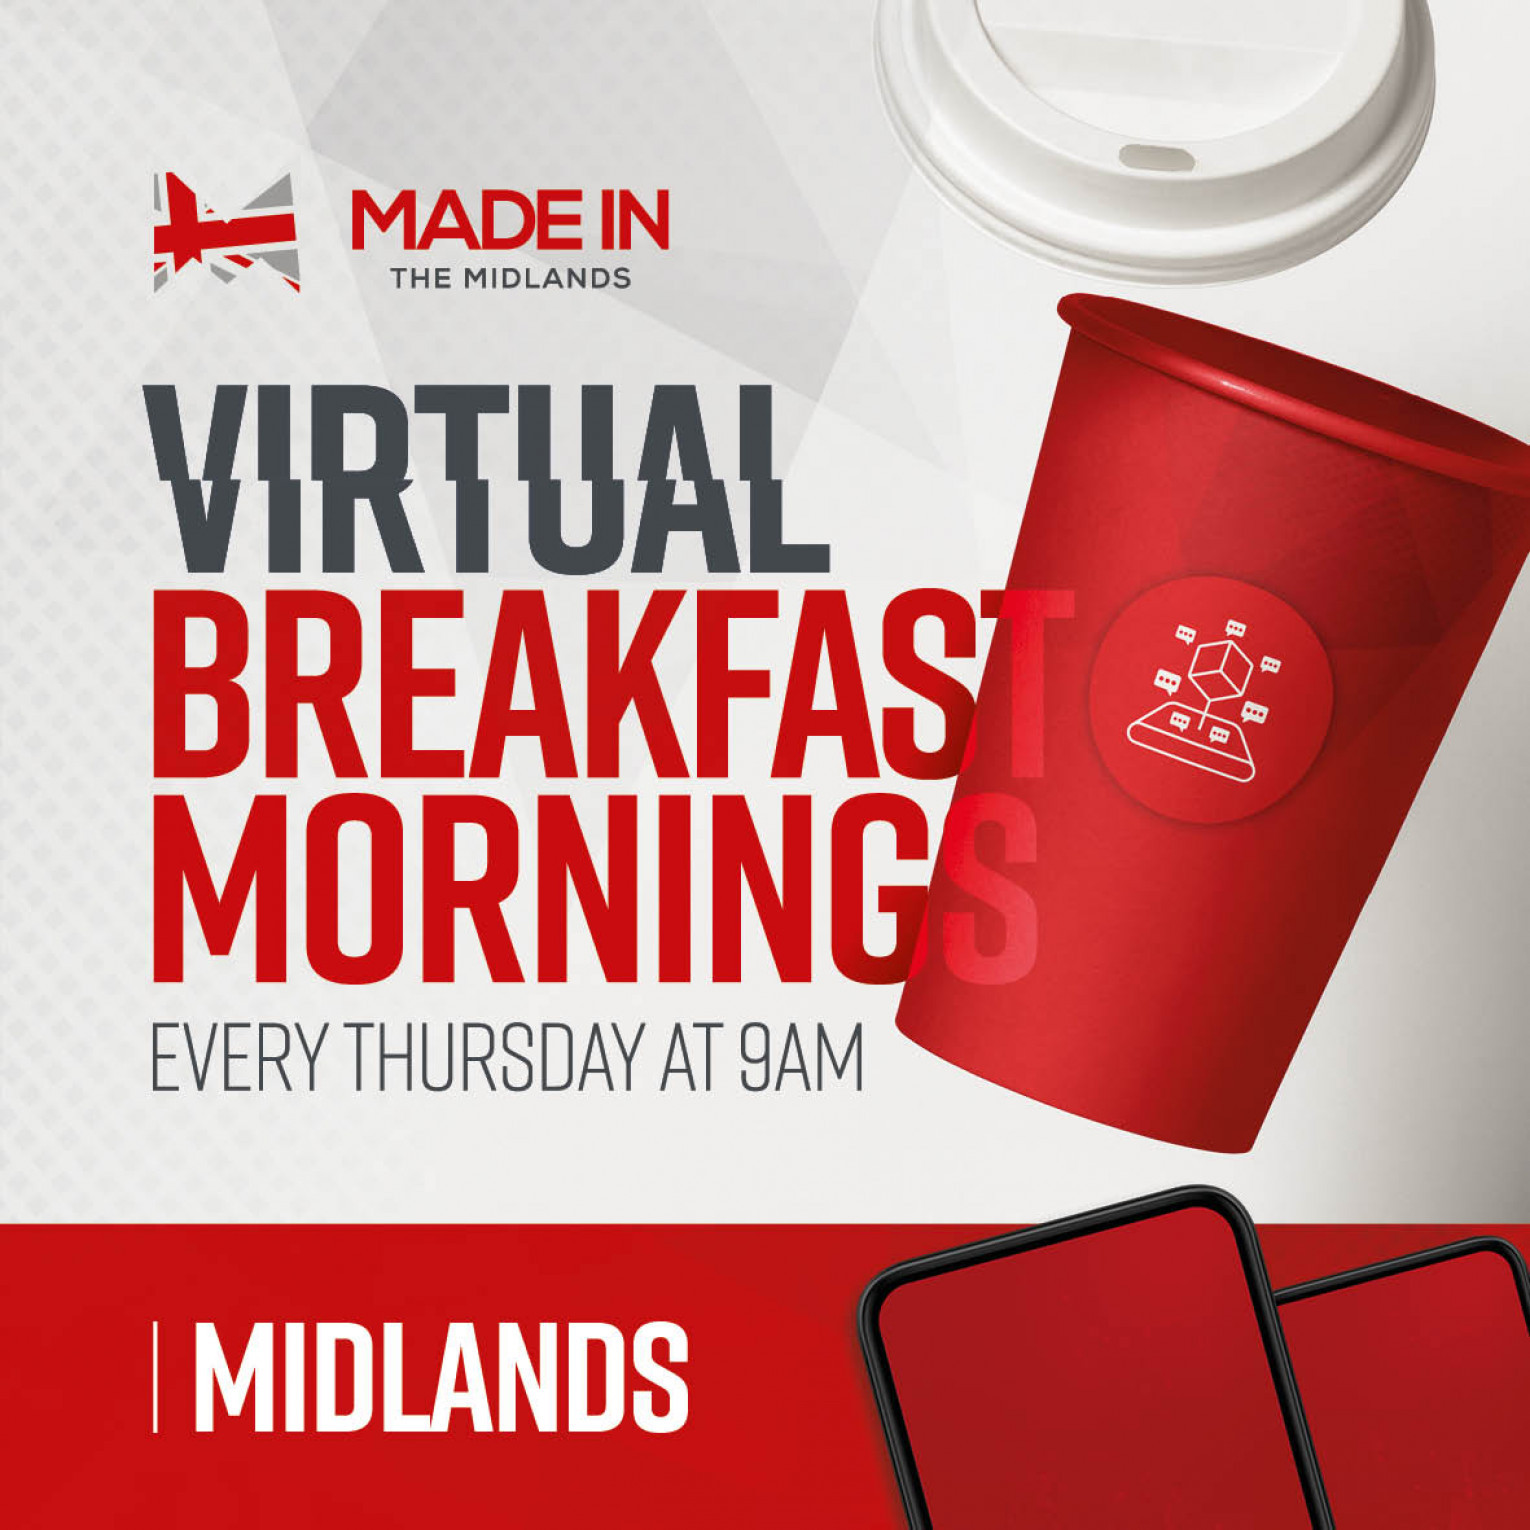 Made in the Midlands Virtual Breakfast Morning with Swiss Steel